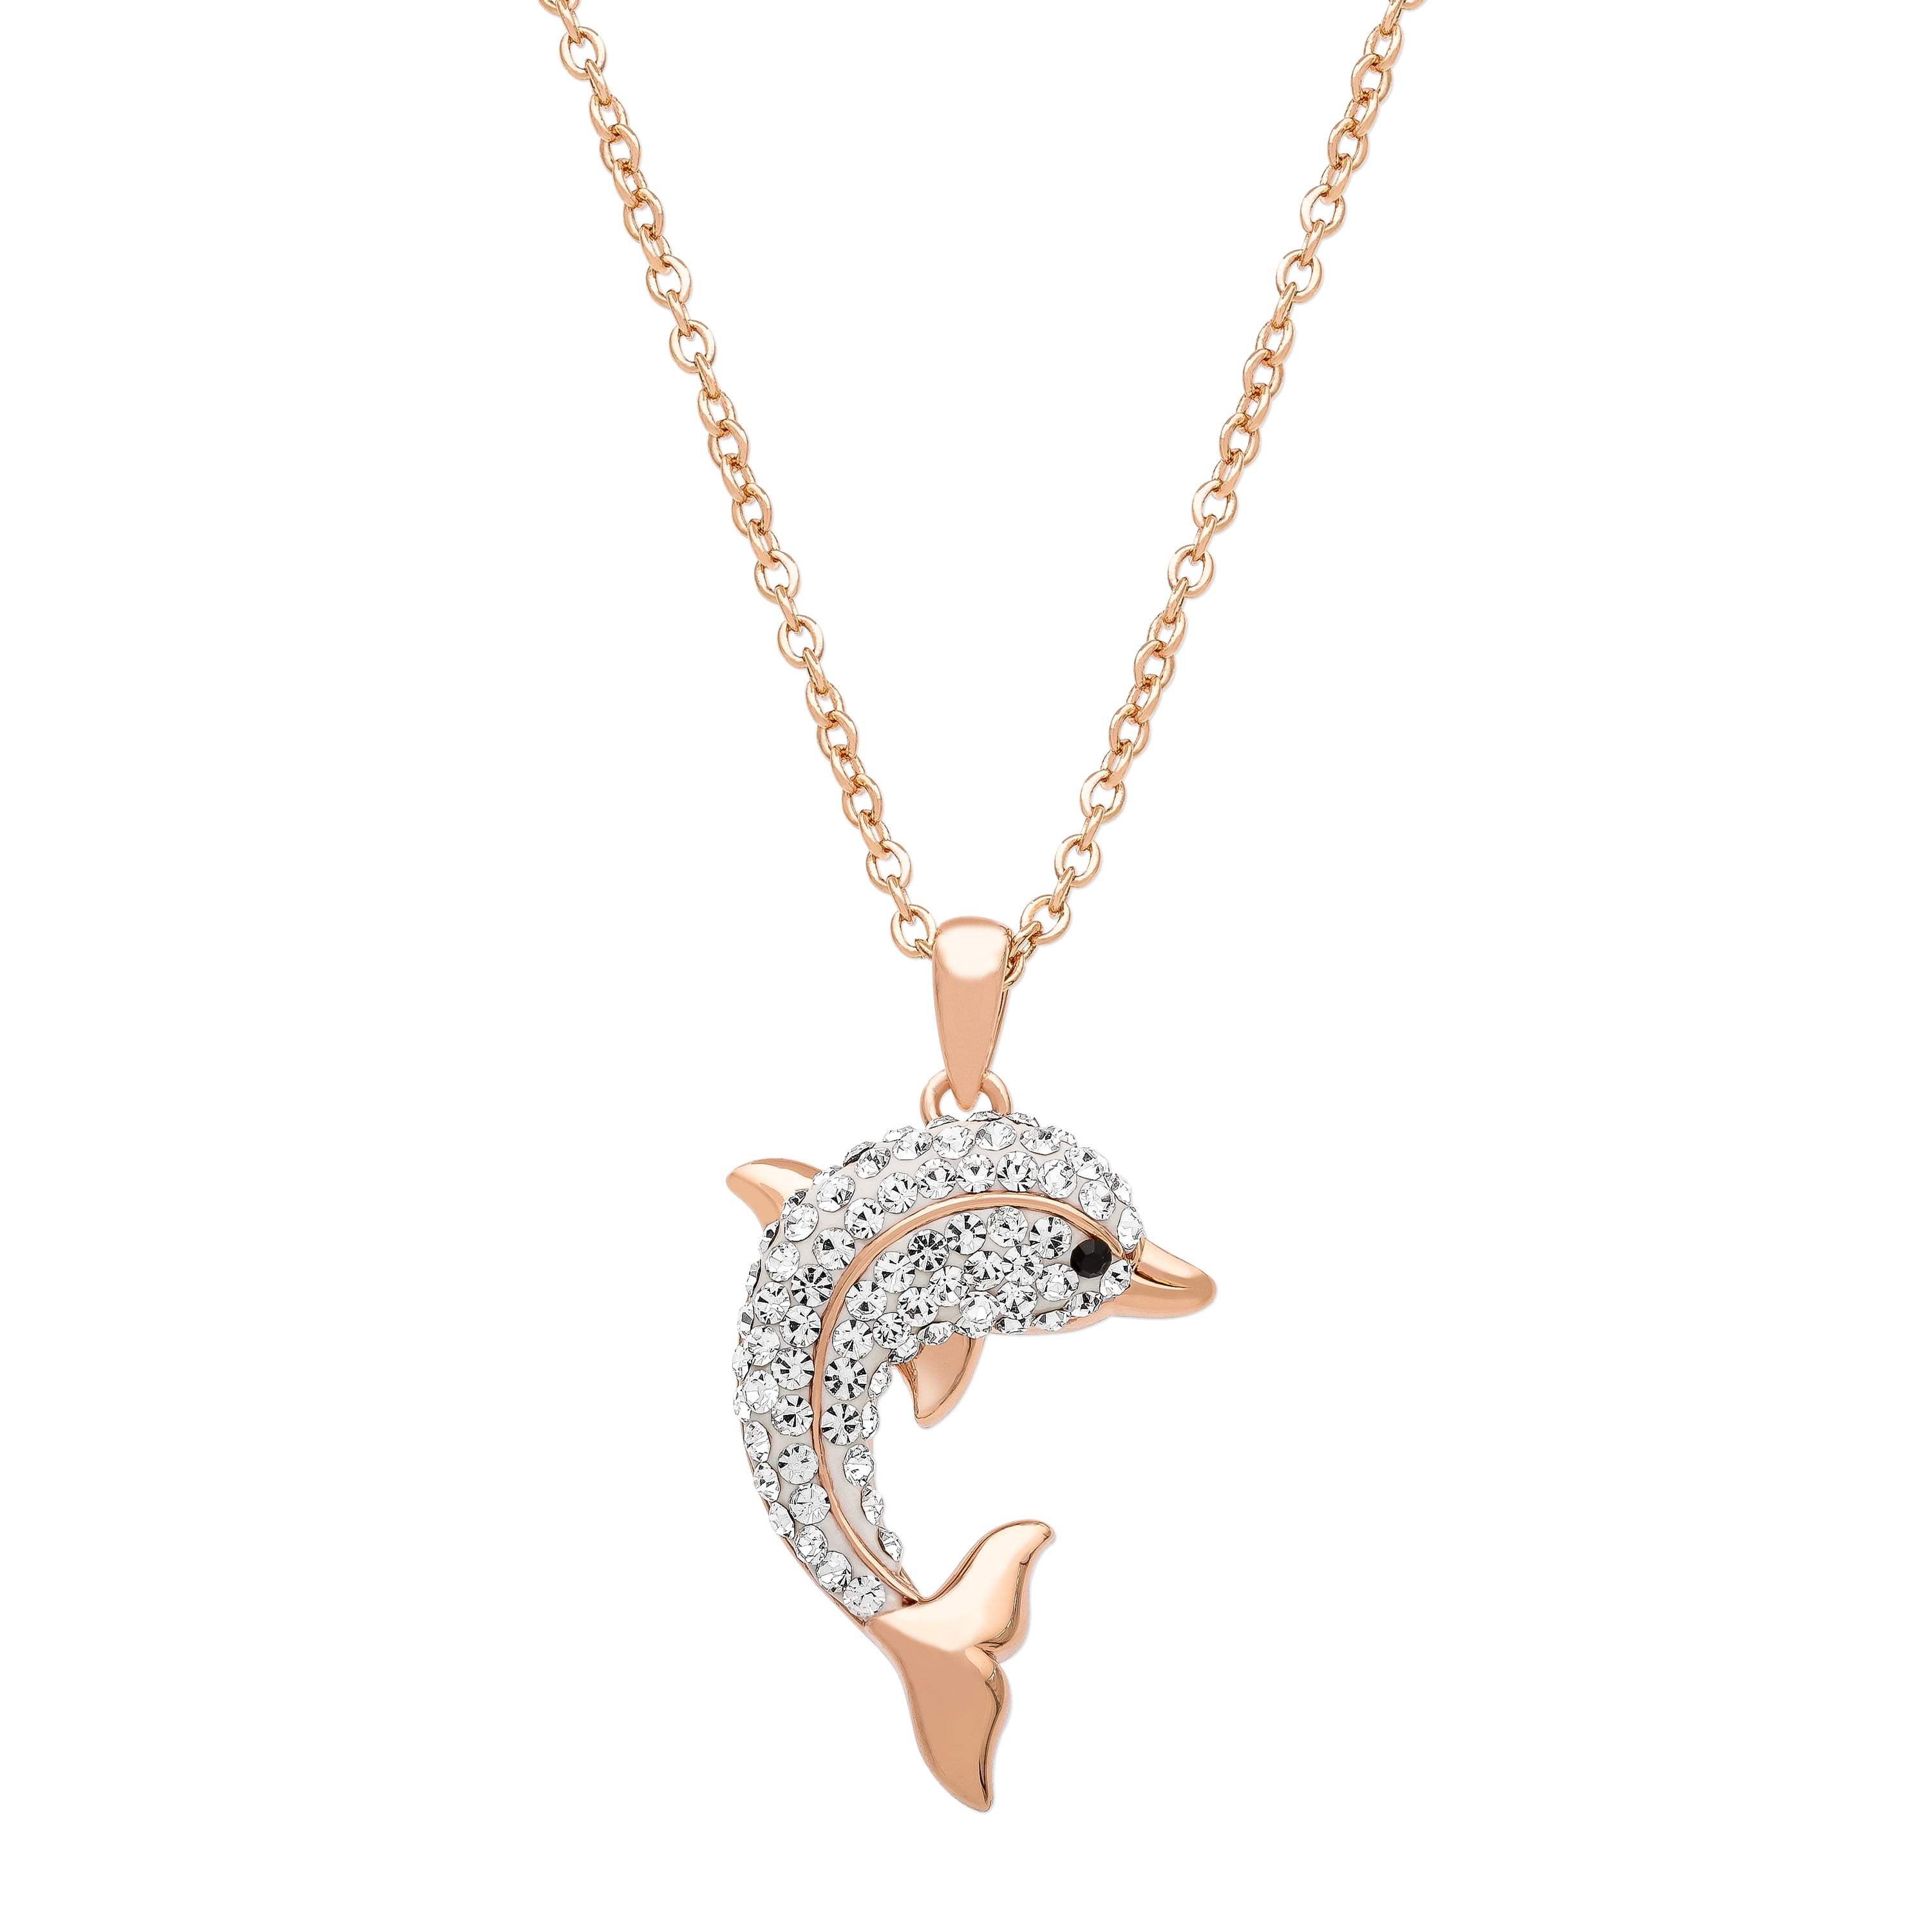 Cute Dolphin Charm Pendant 18" Chain Necklace in Gift Bag